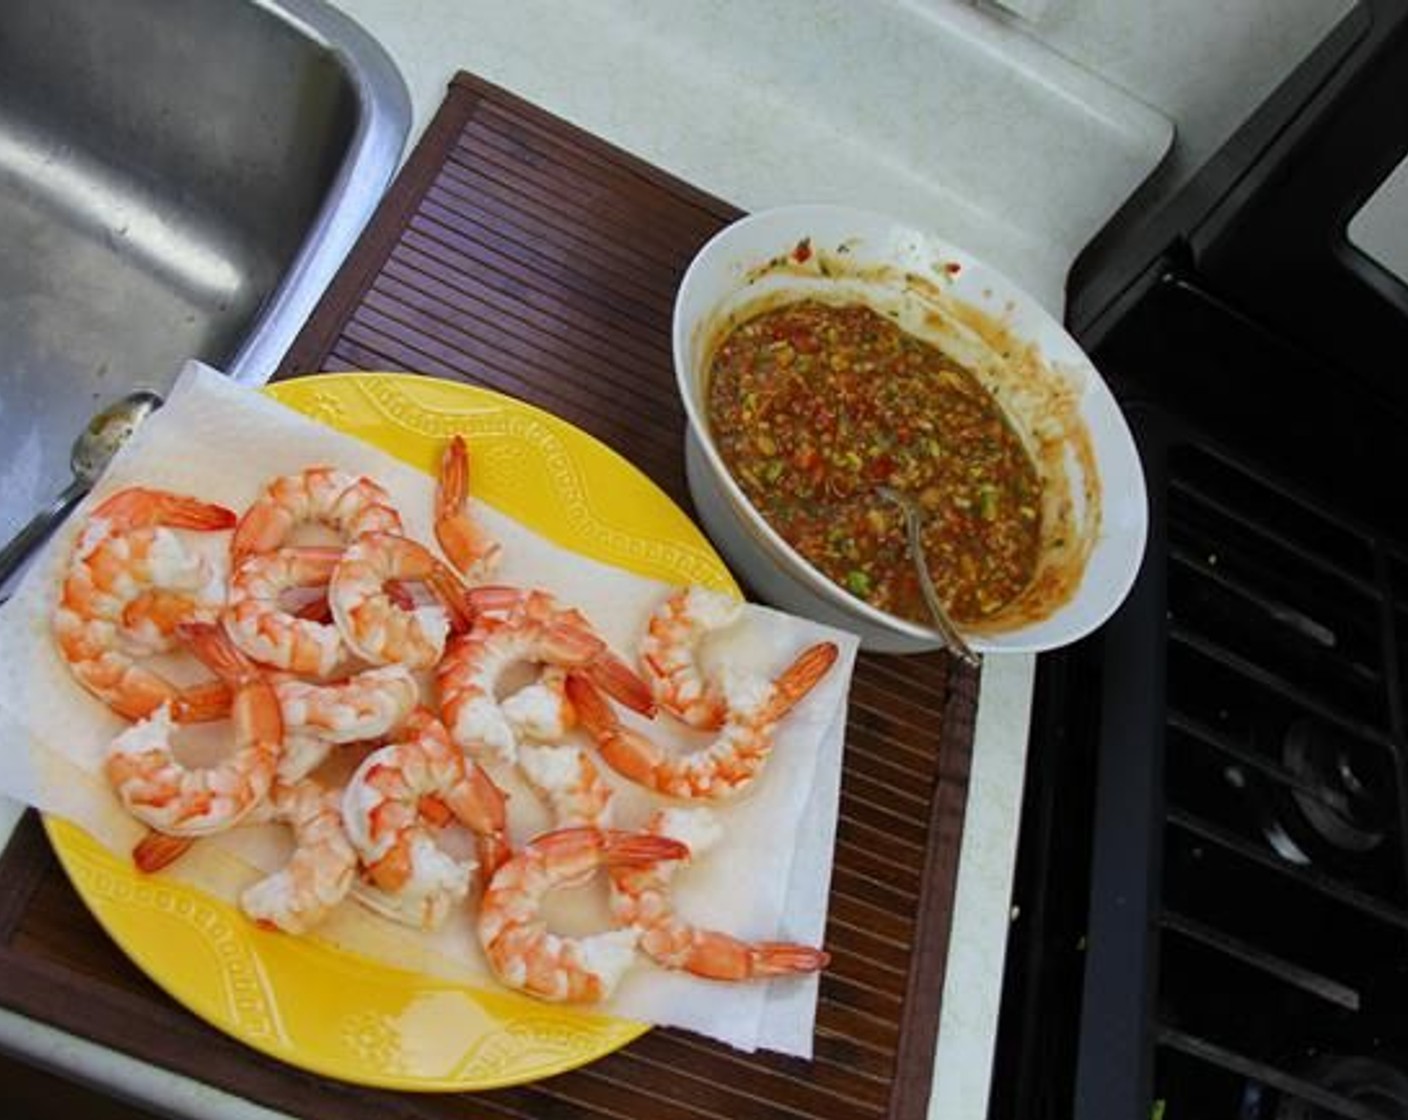 step 5 For a quick fix, use the frozen (cooked) Peeled Prawns (12 oz) you can get at the grocery stores. Thaw, rinse with cool water and pat dry with paper towels.